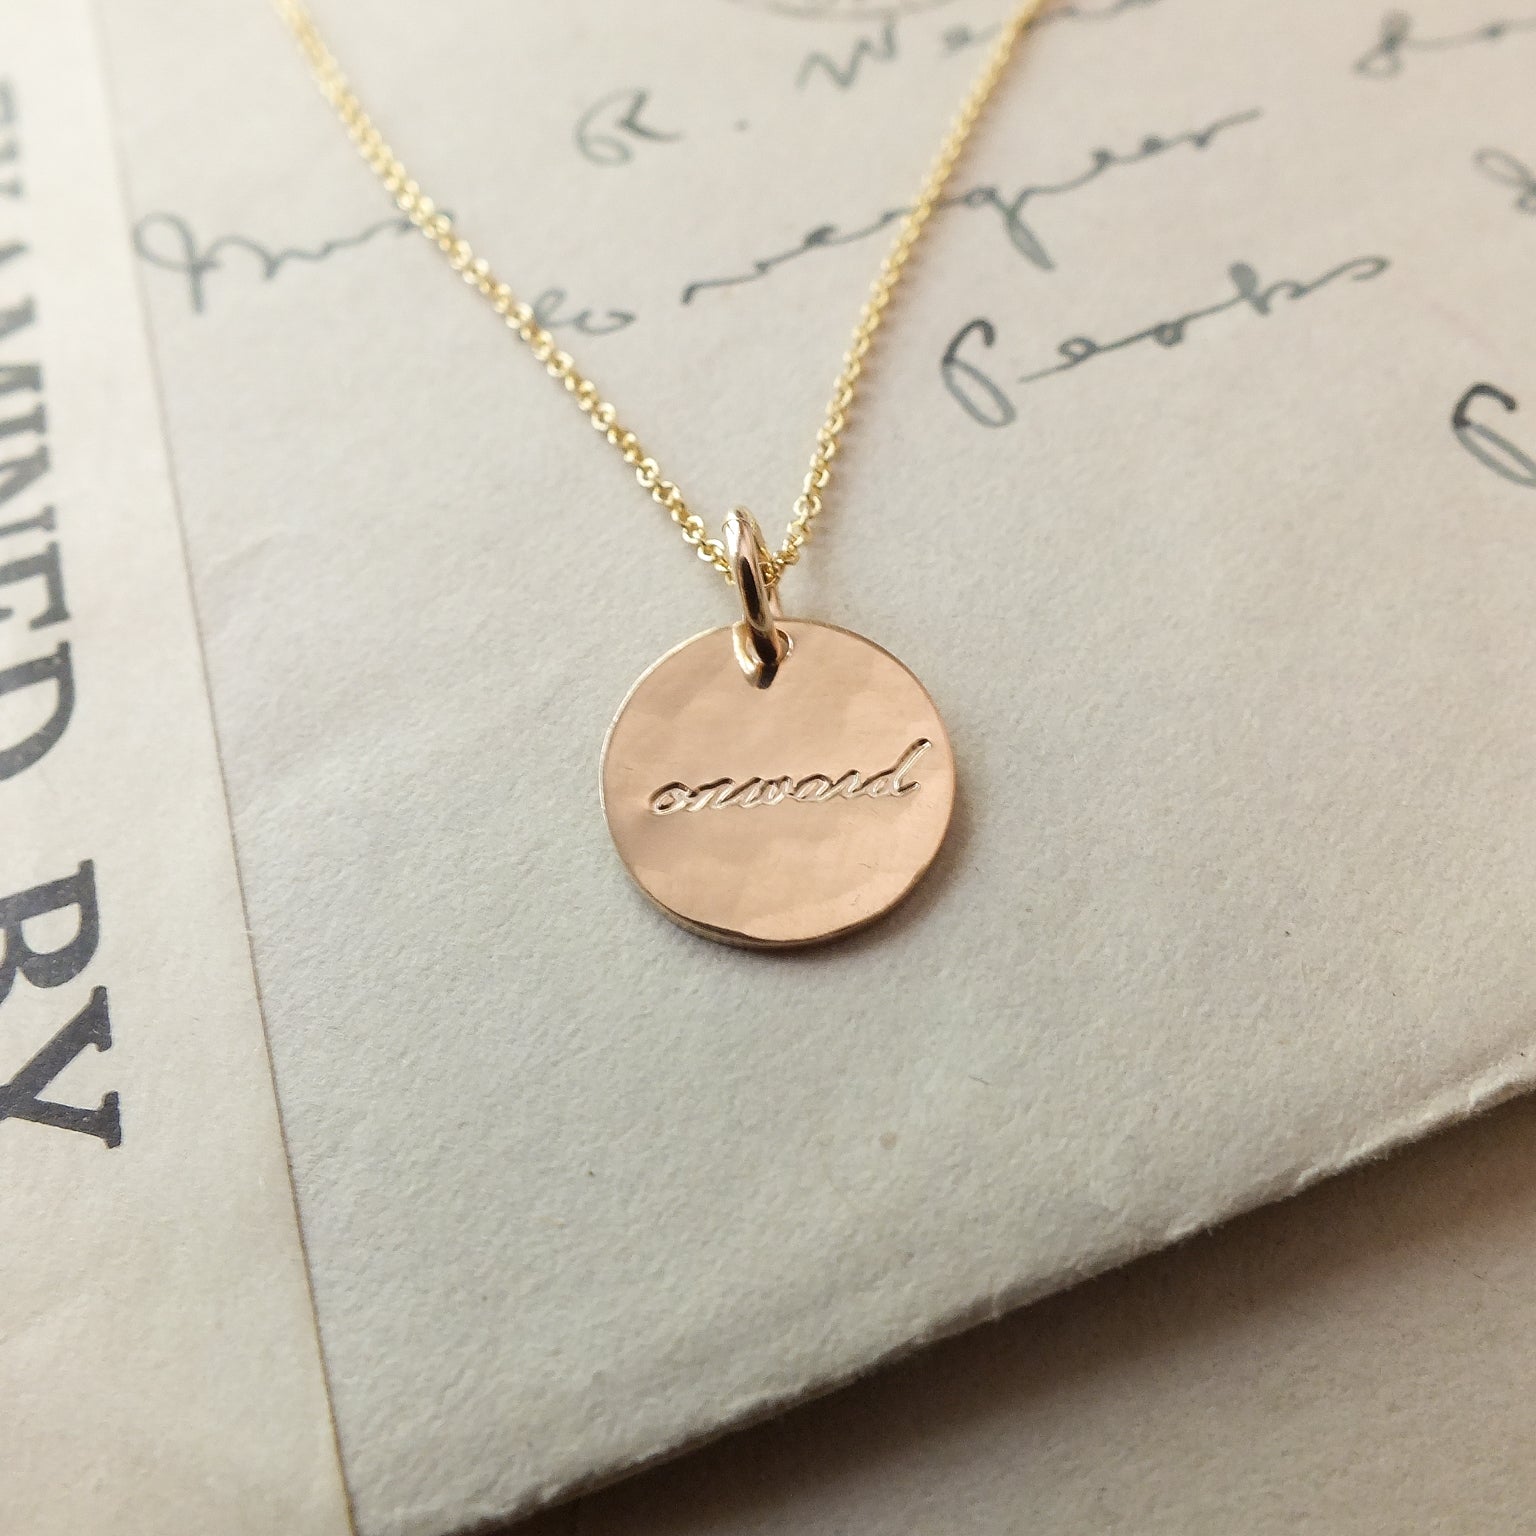 A Becoming Jewelry Onward Necklace with the word 